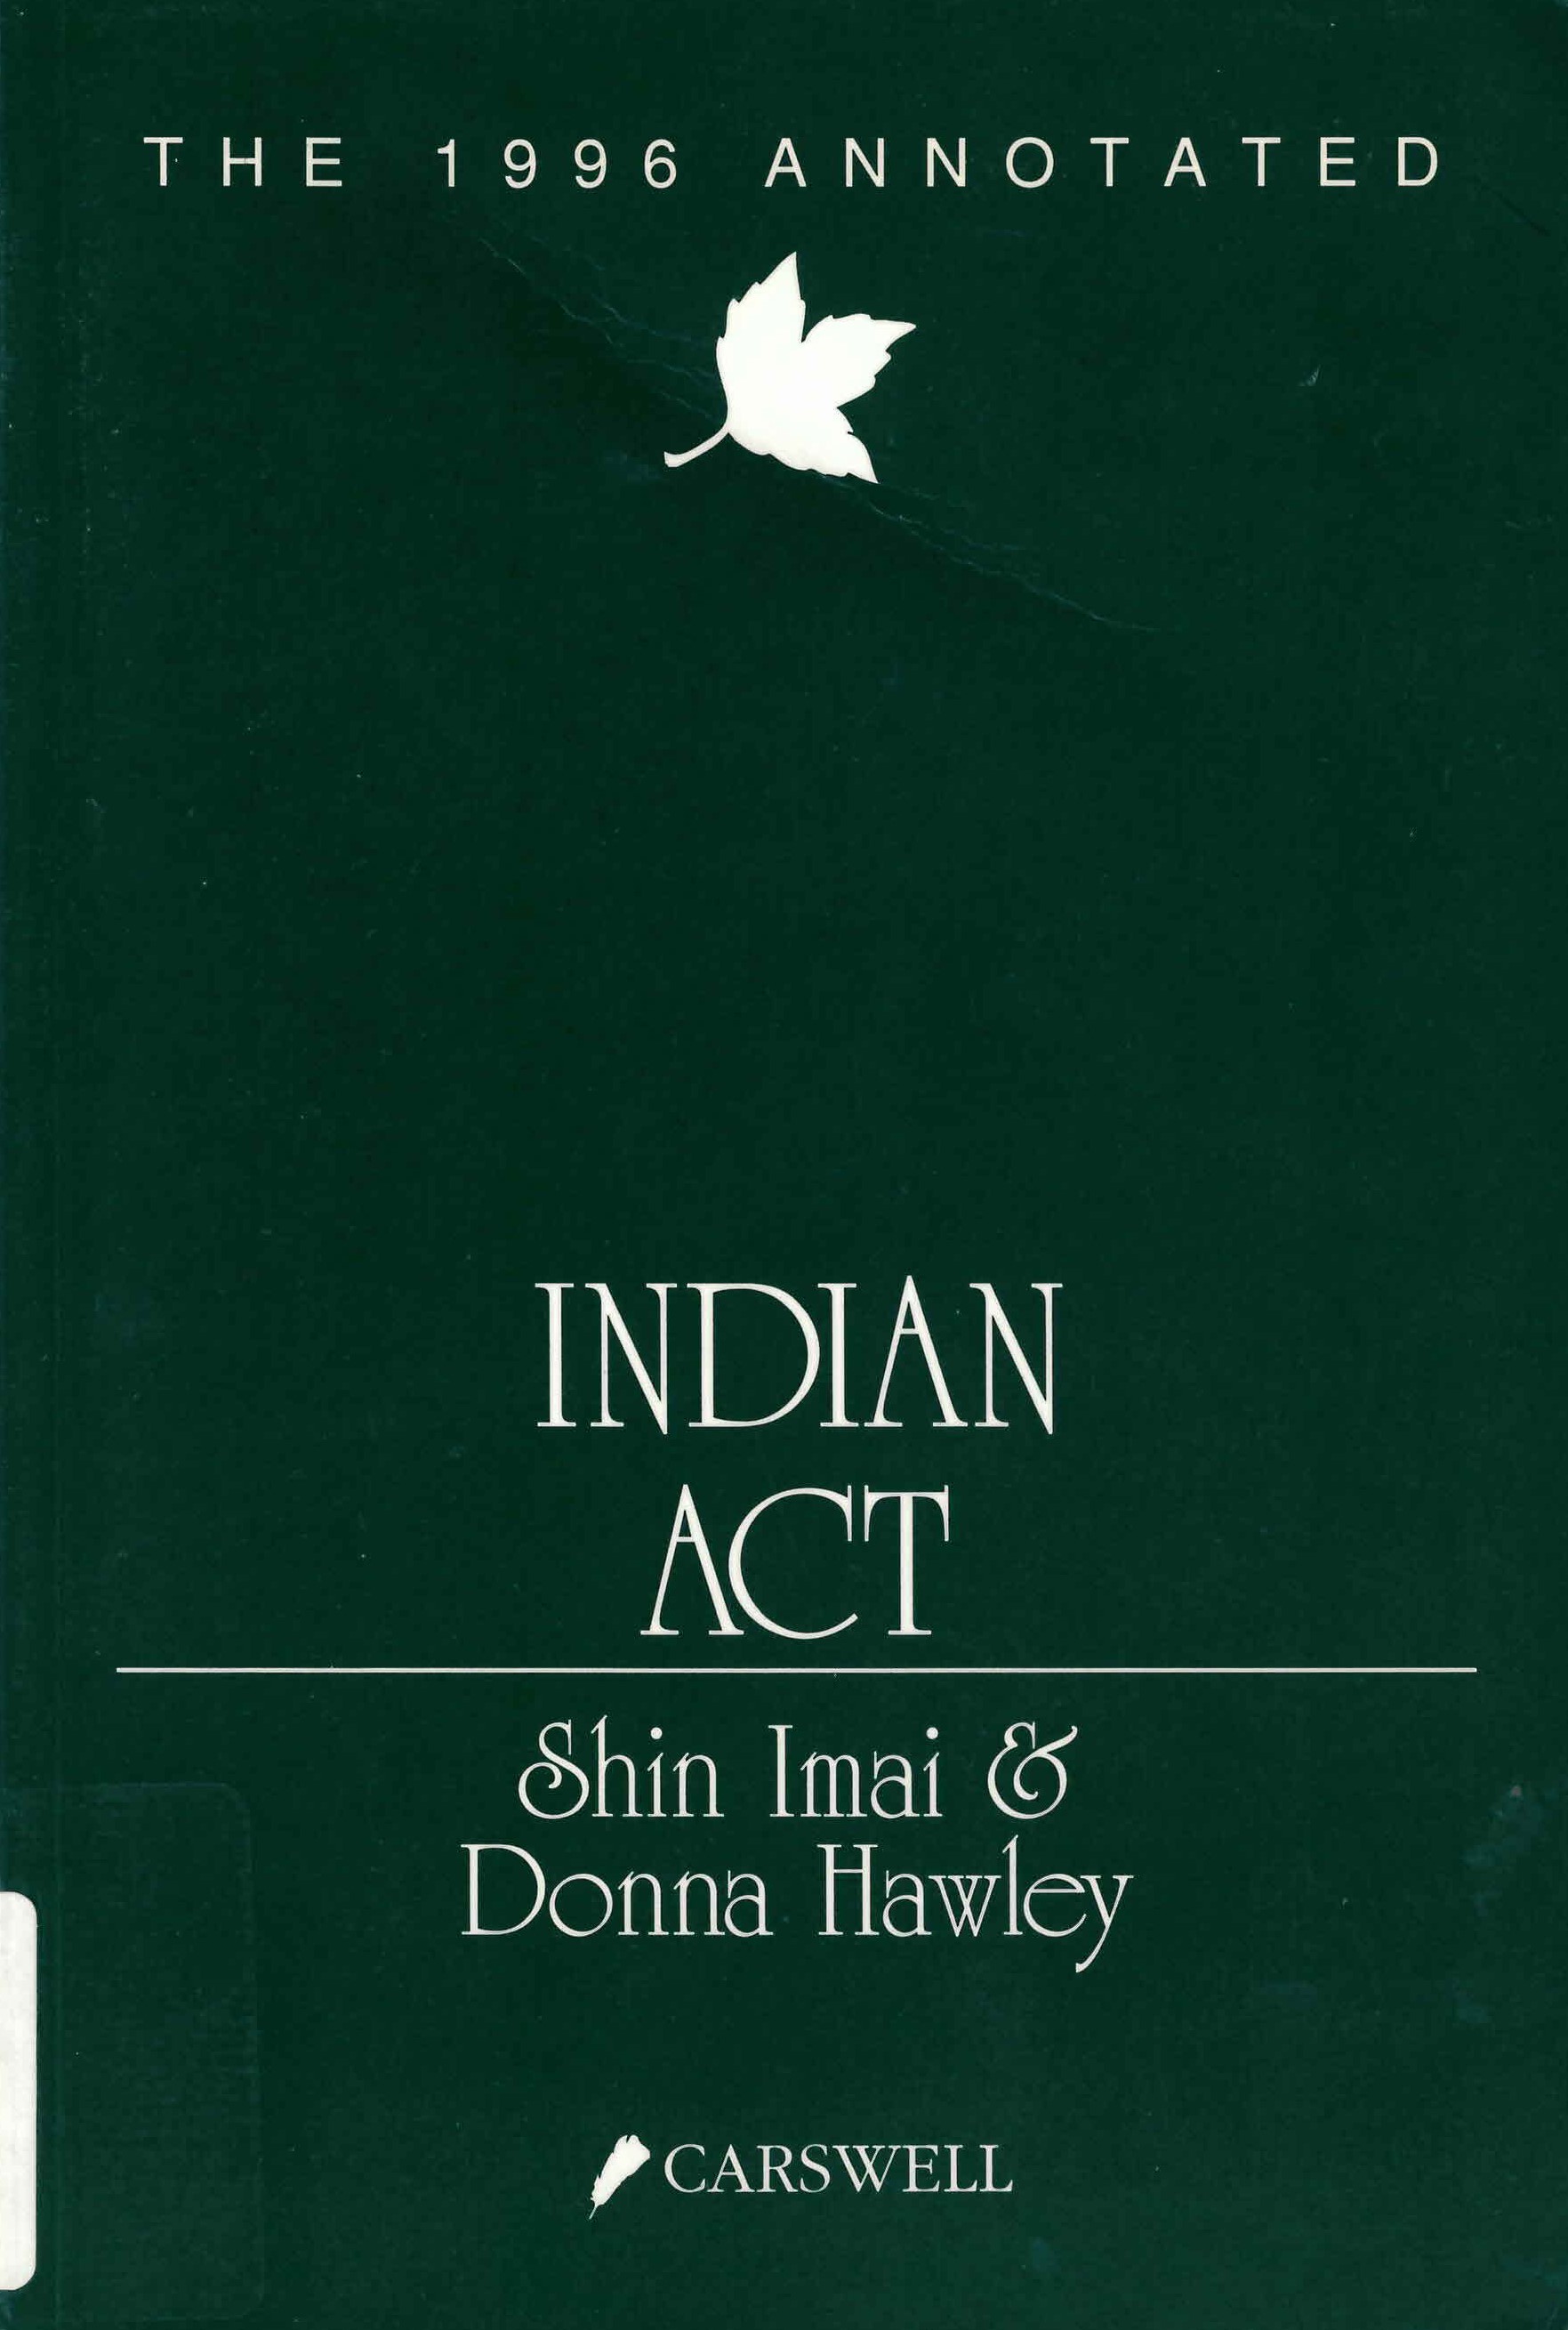 The annotated Indian Act 1996